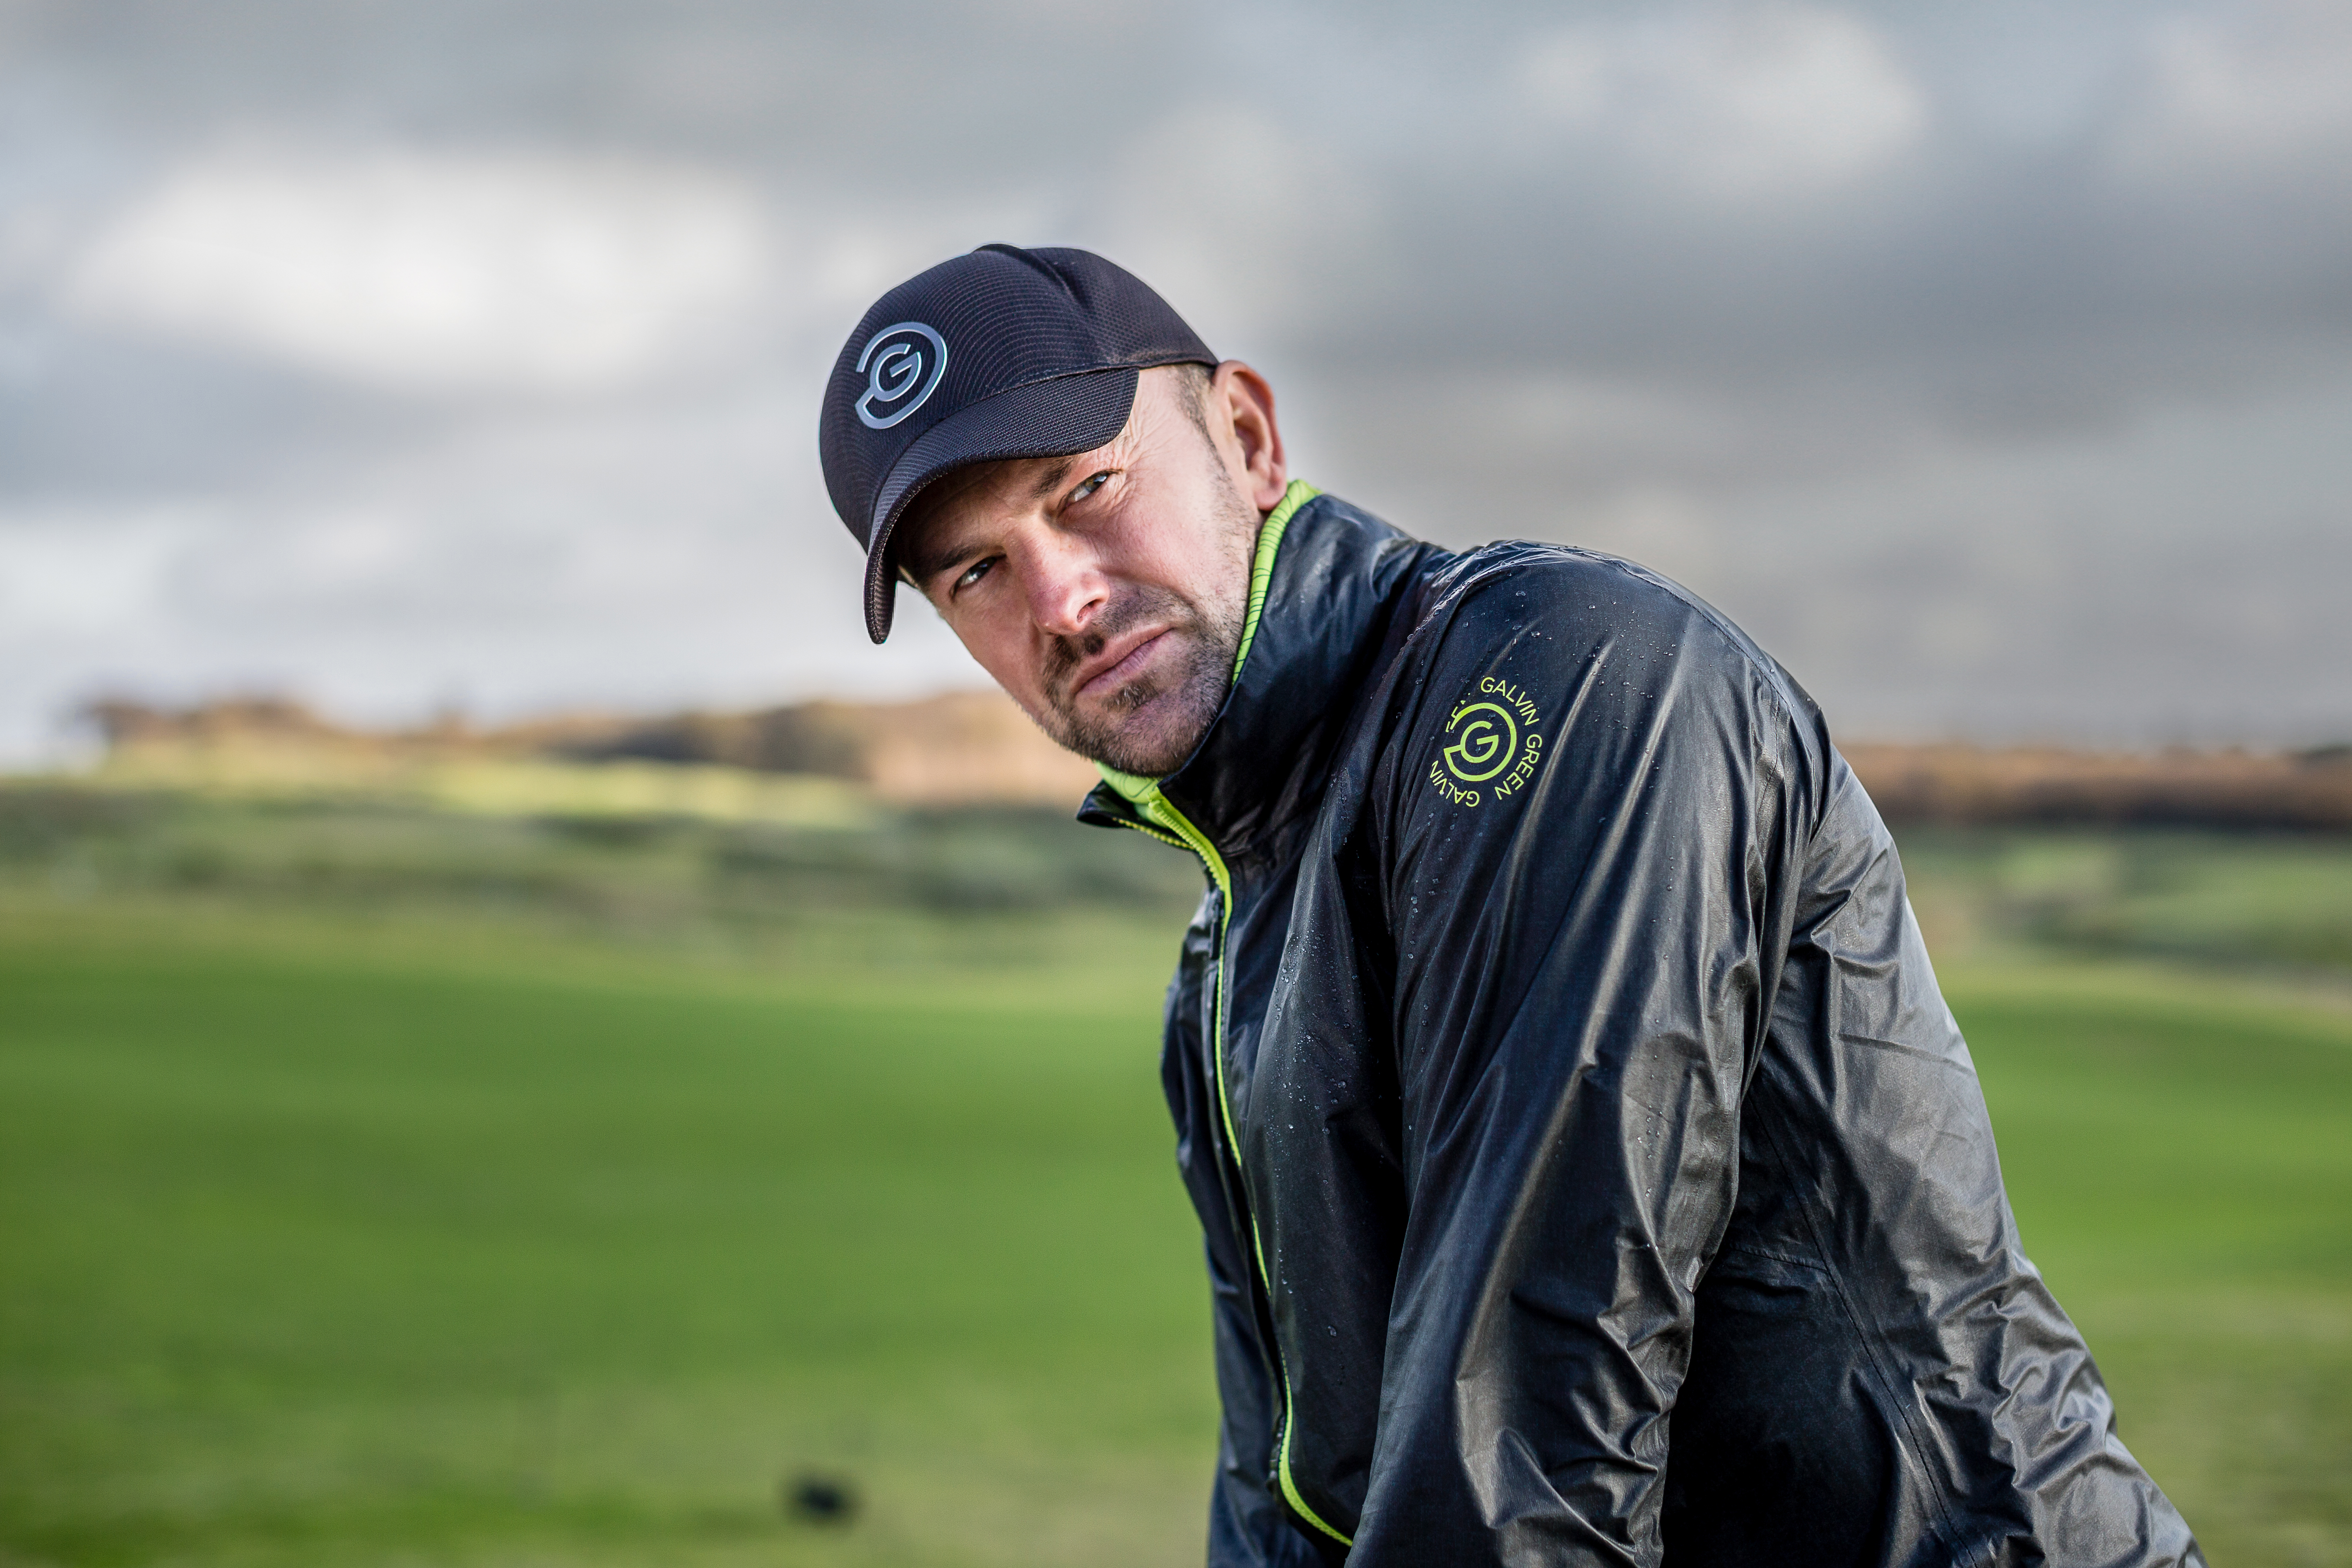 SHAKEDRY™, Latest Hi-Tech Golf Gear From Galvin Green - The Golf Wire